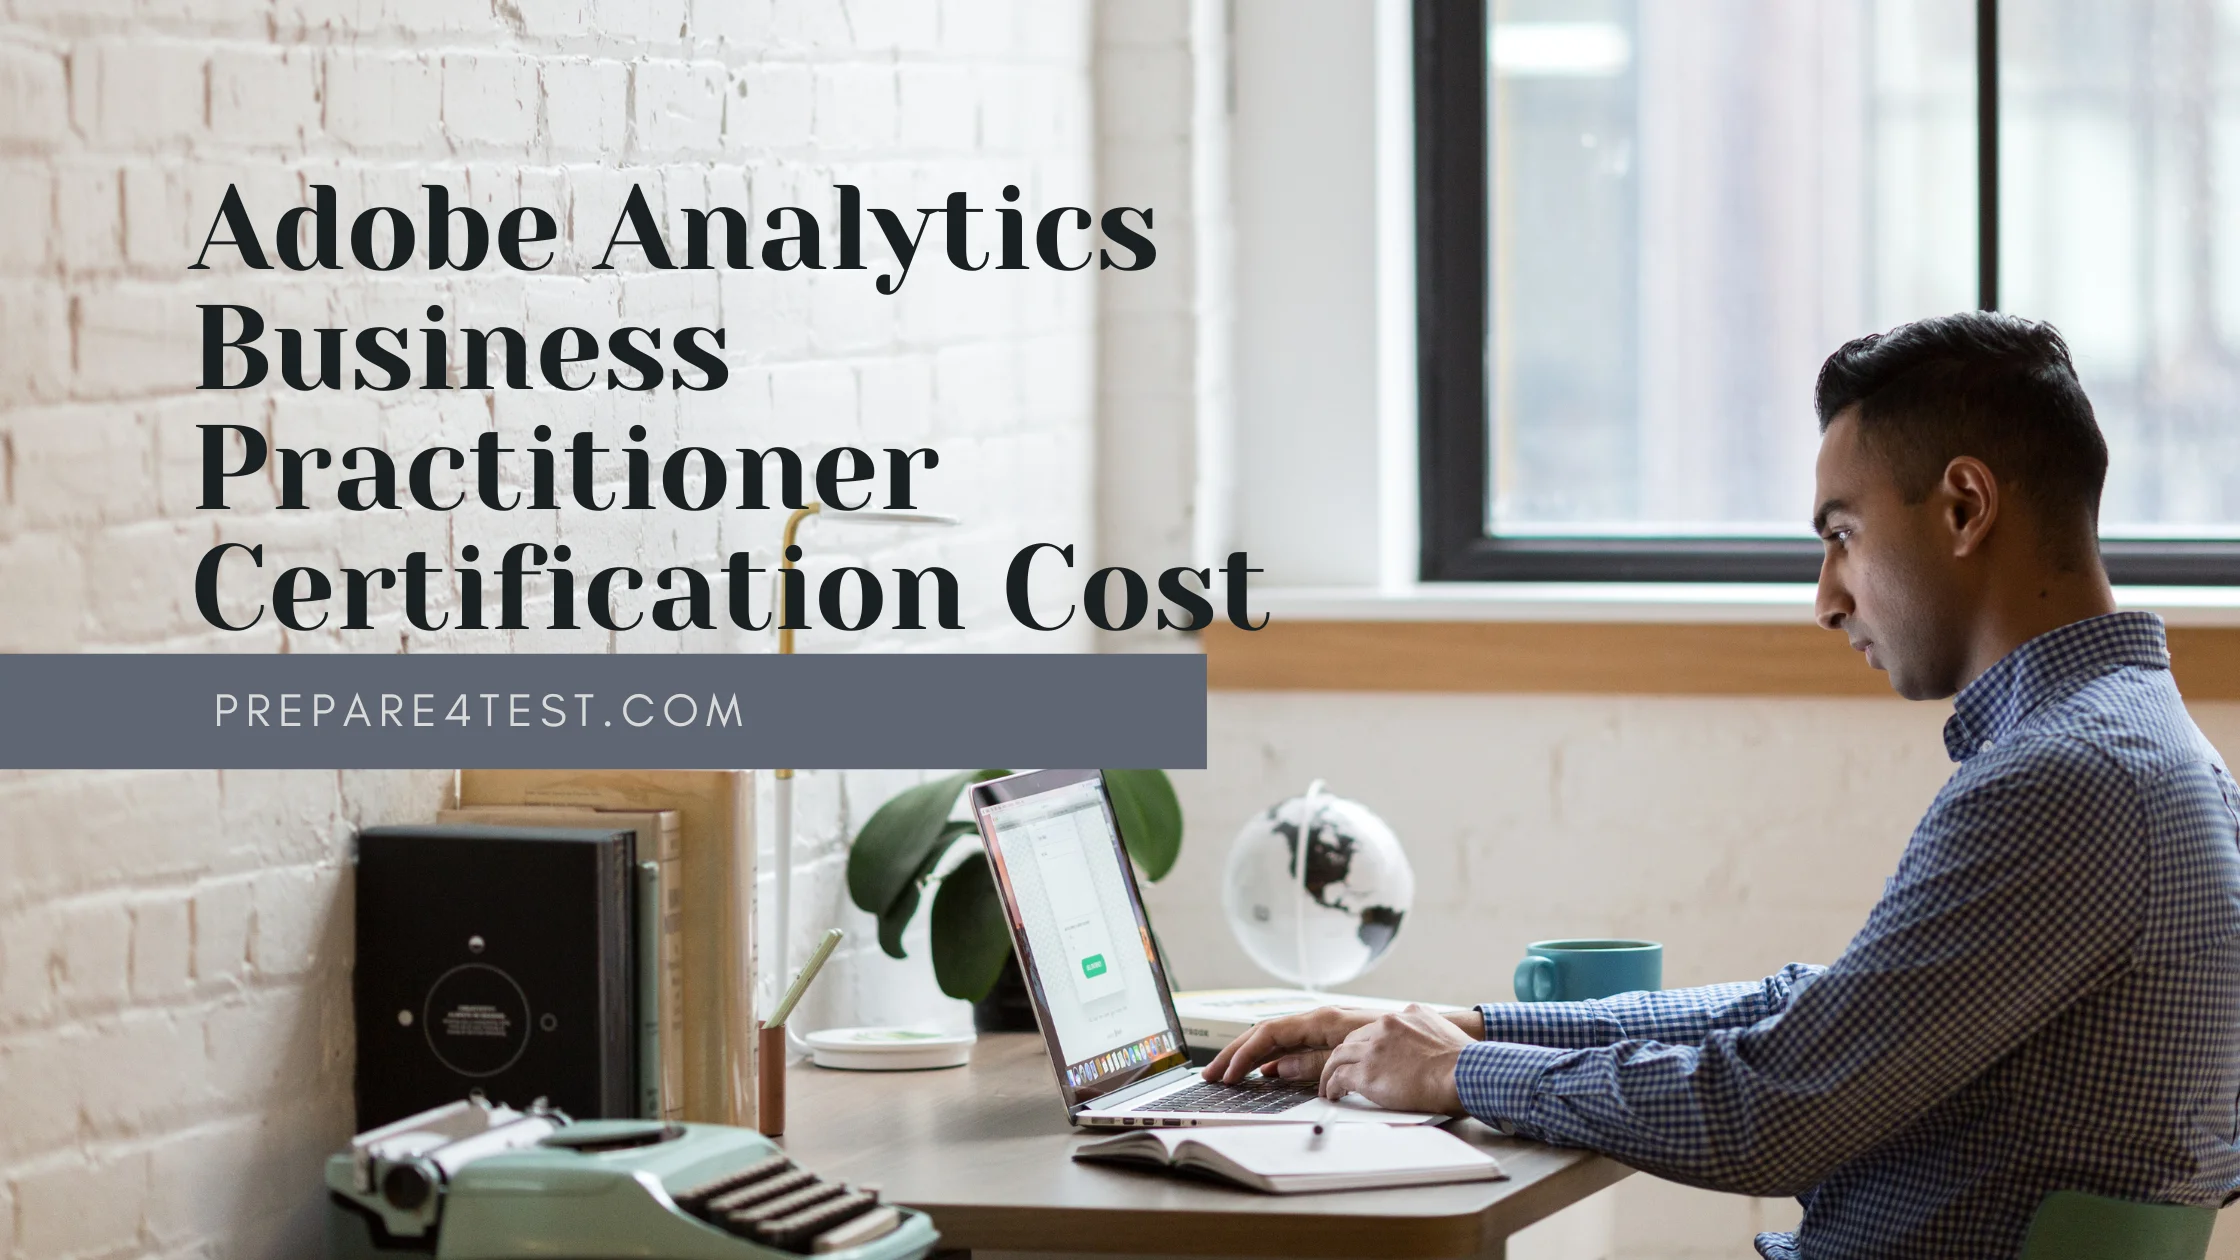 Adobe Analytics Business Practitioner Certification Cost guarantee